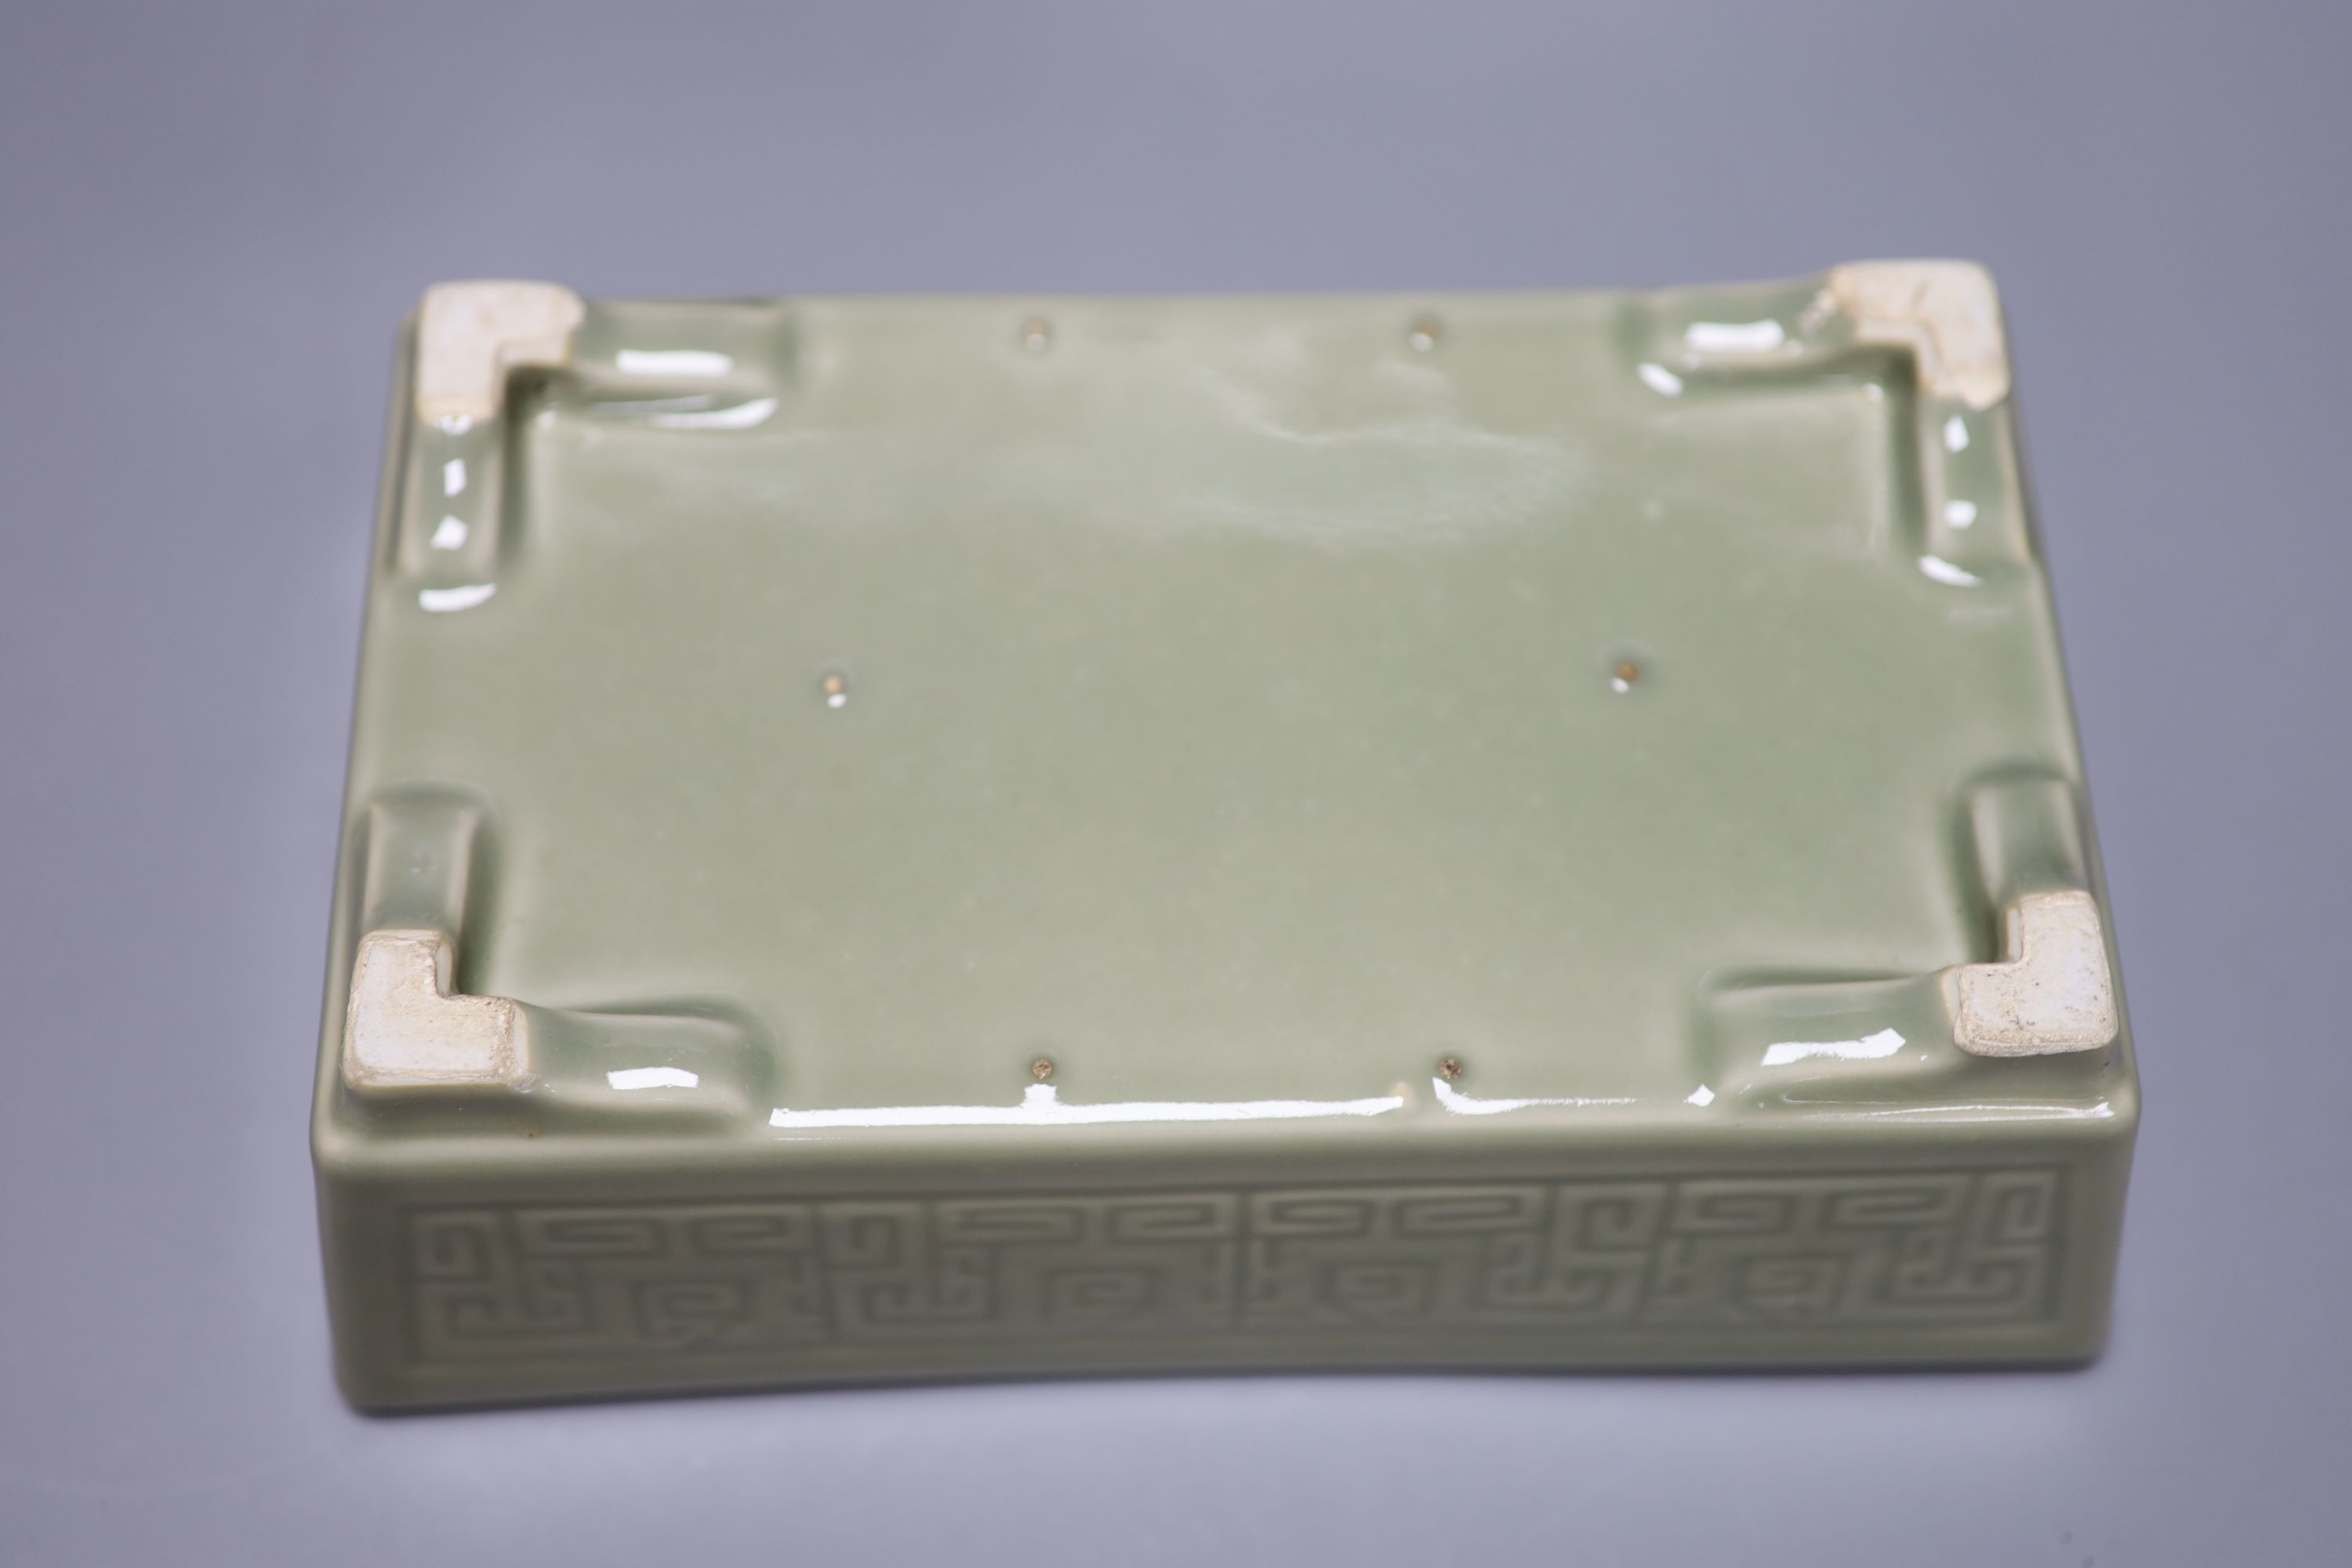 A pair of Chinese celadon glazed rectangular planters, late 19th to 20th century, length 24cm